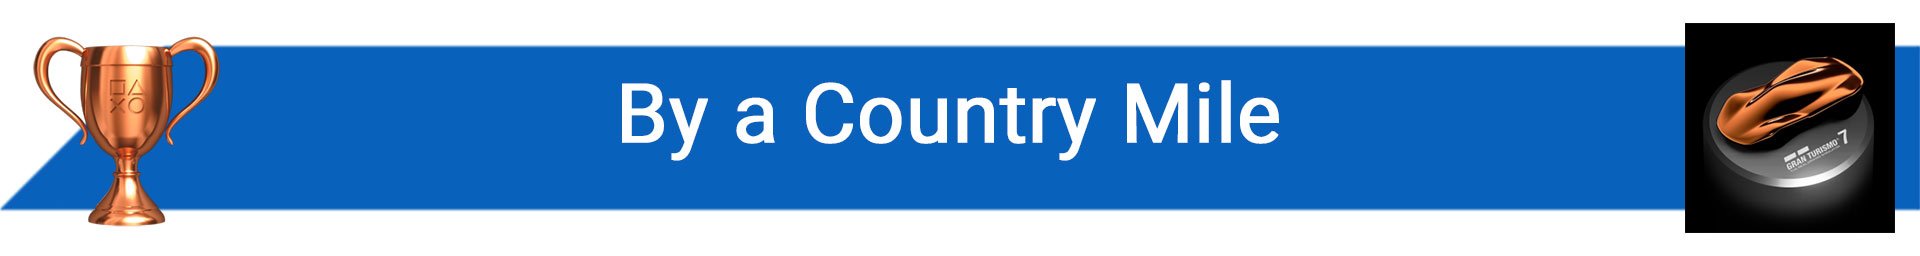 Trophy By a Country Mile